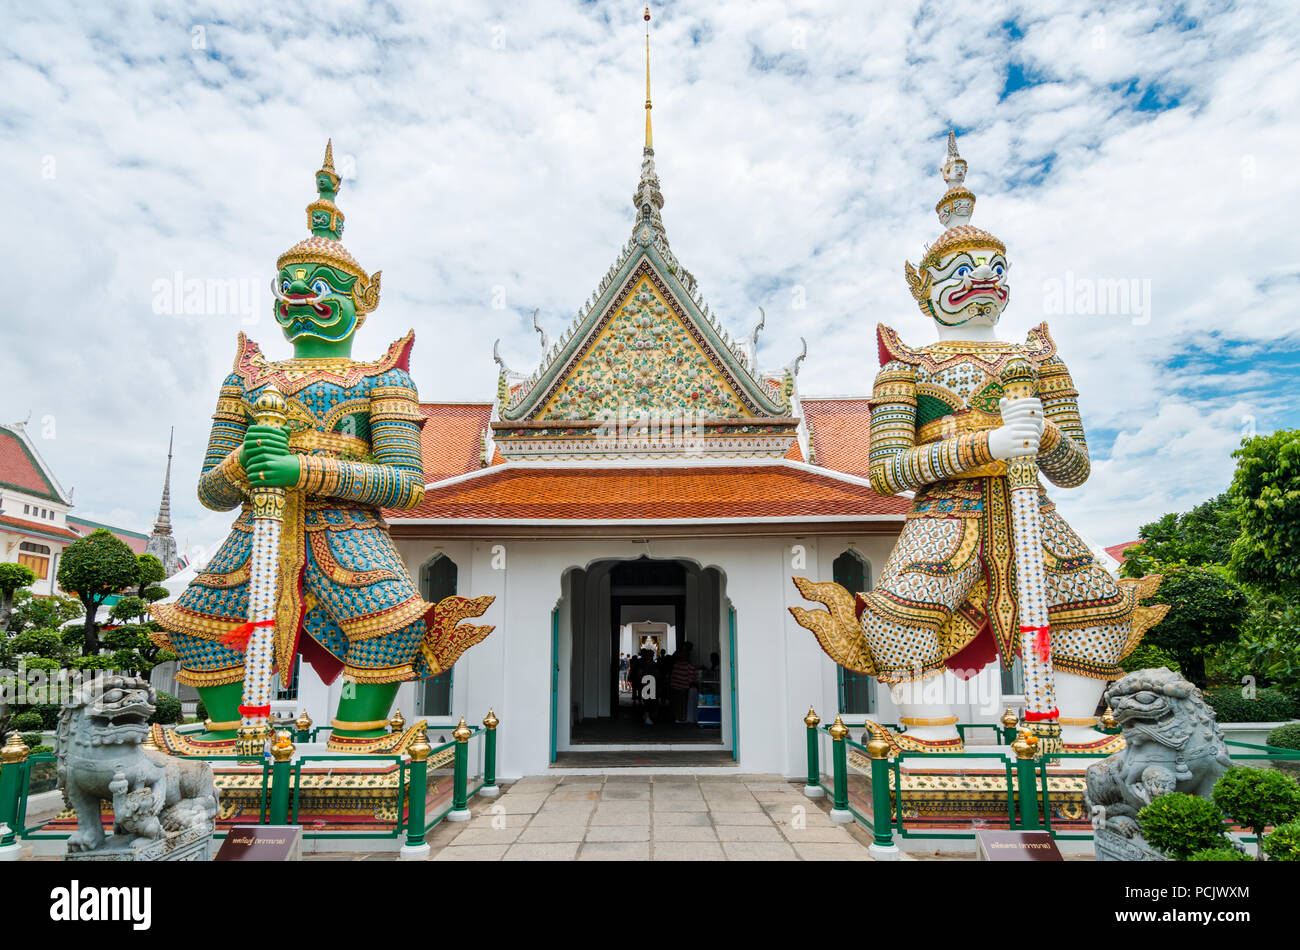 Demon Guardian of Wat Arun. Wat Arun is  the most famous and photographed temple in Bangkok, which features a soaring 70m high spire. Stock Photo